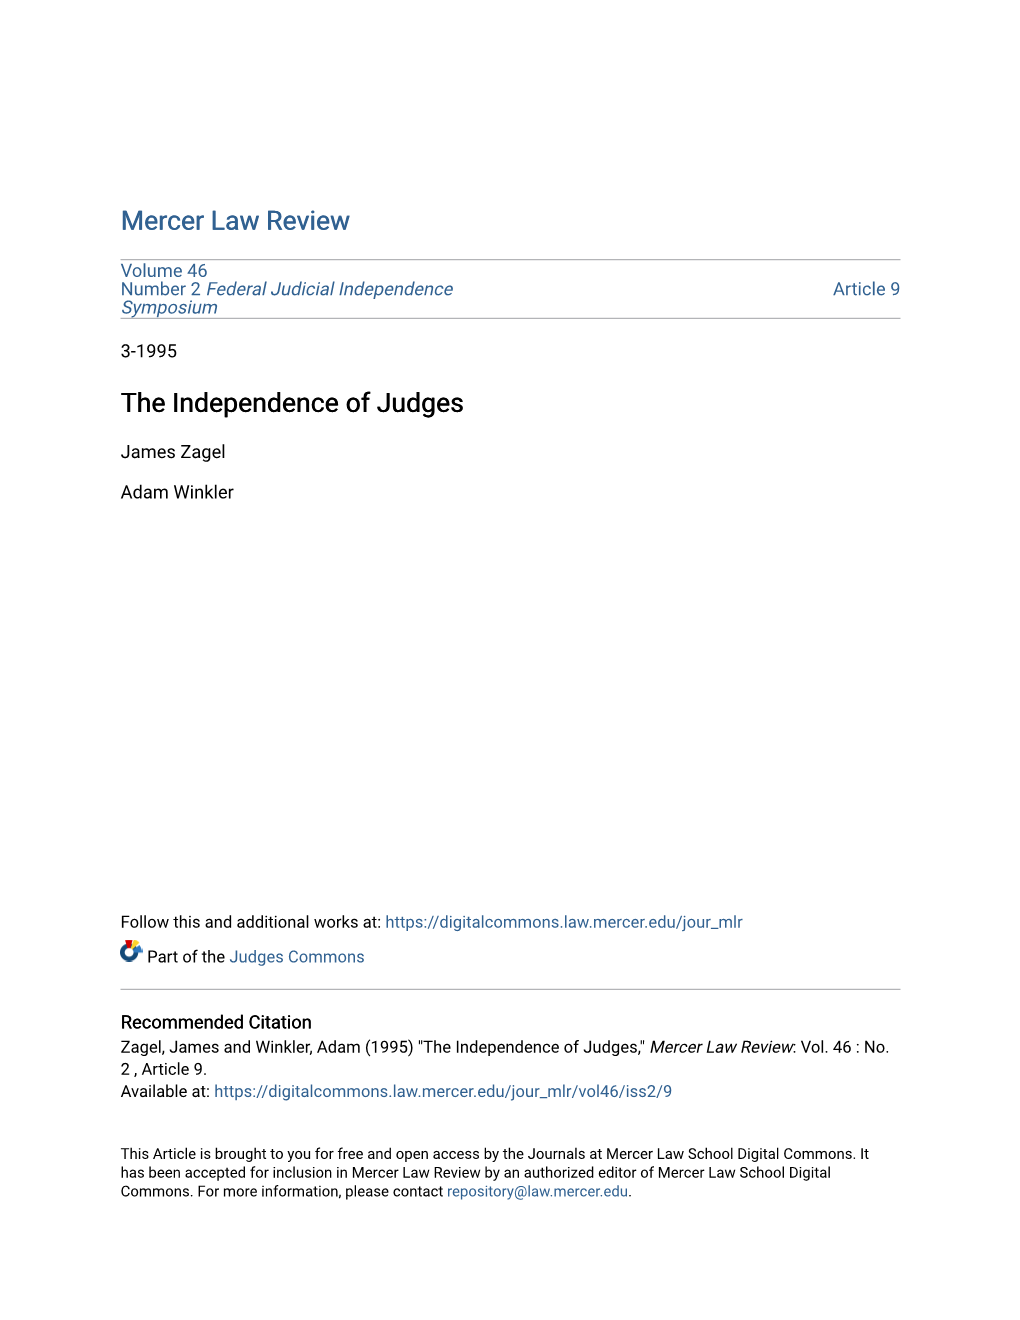 The Independence of Judges